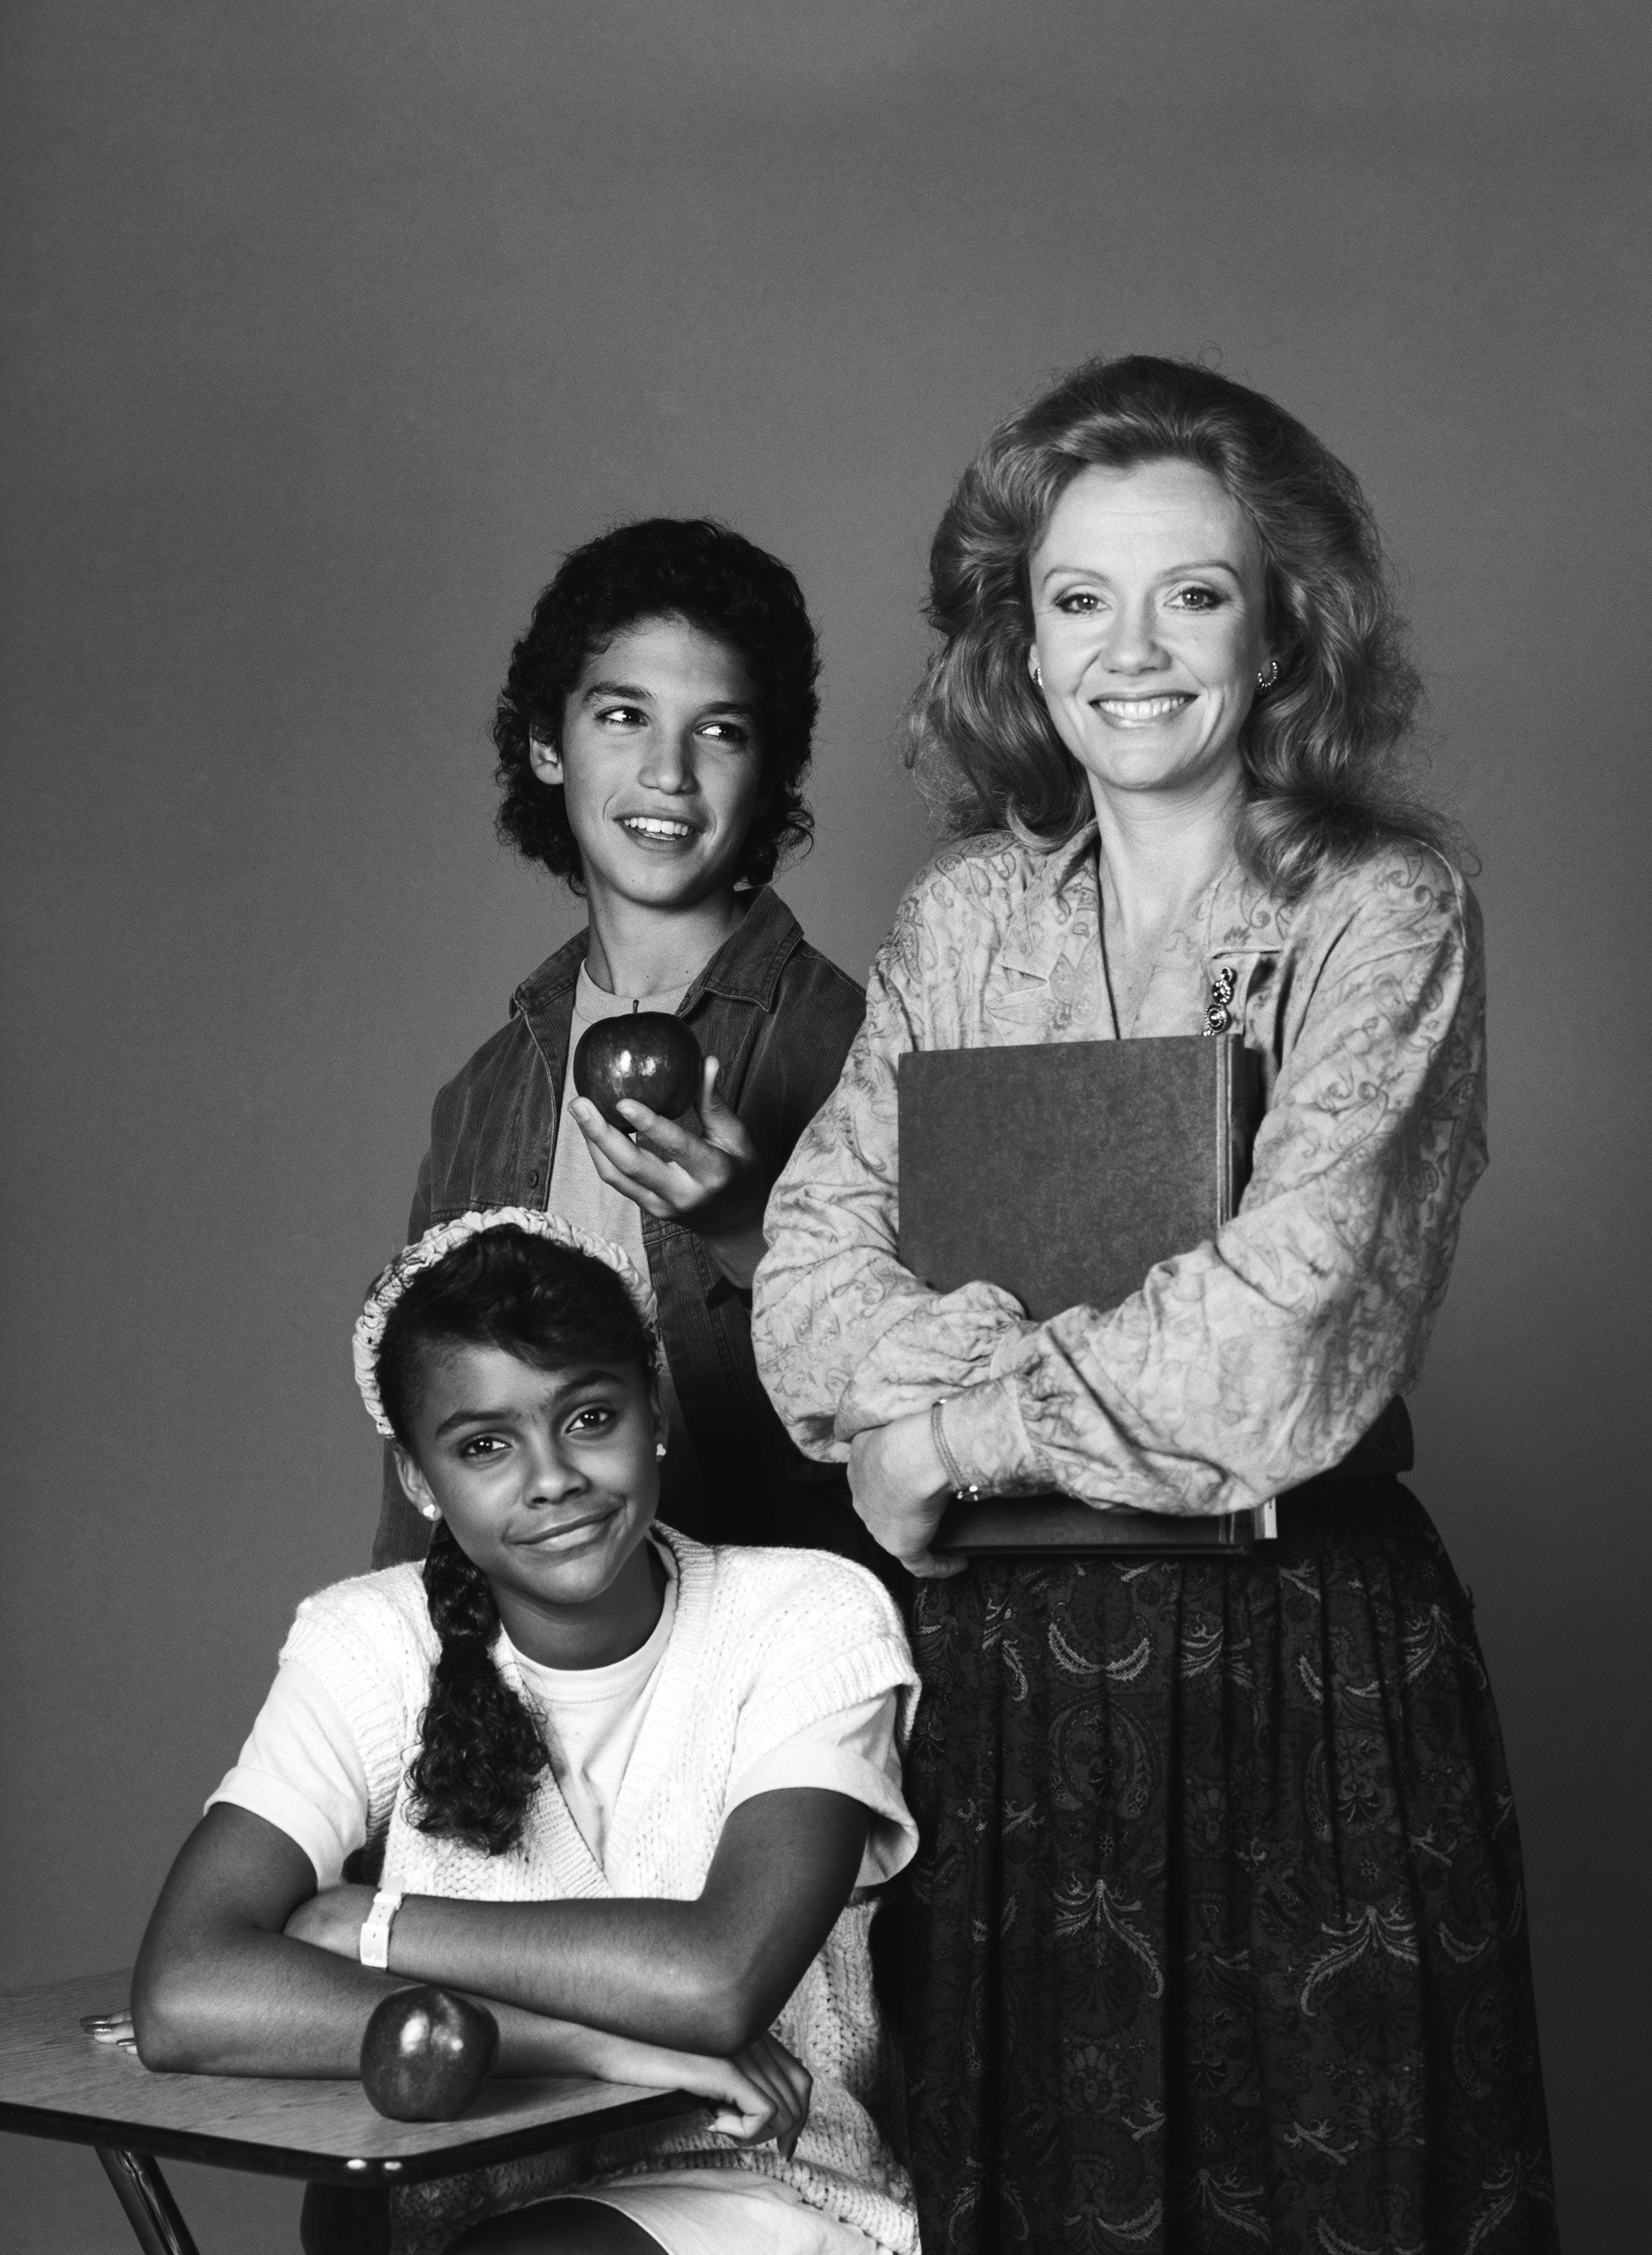 Max Battimo as Mikey, Lark Voorhies as Lisa, and Hayley Mills as Miss Bliss pose for a promotional photo for 'Good Morning, Miss Bliss'